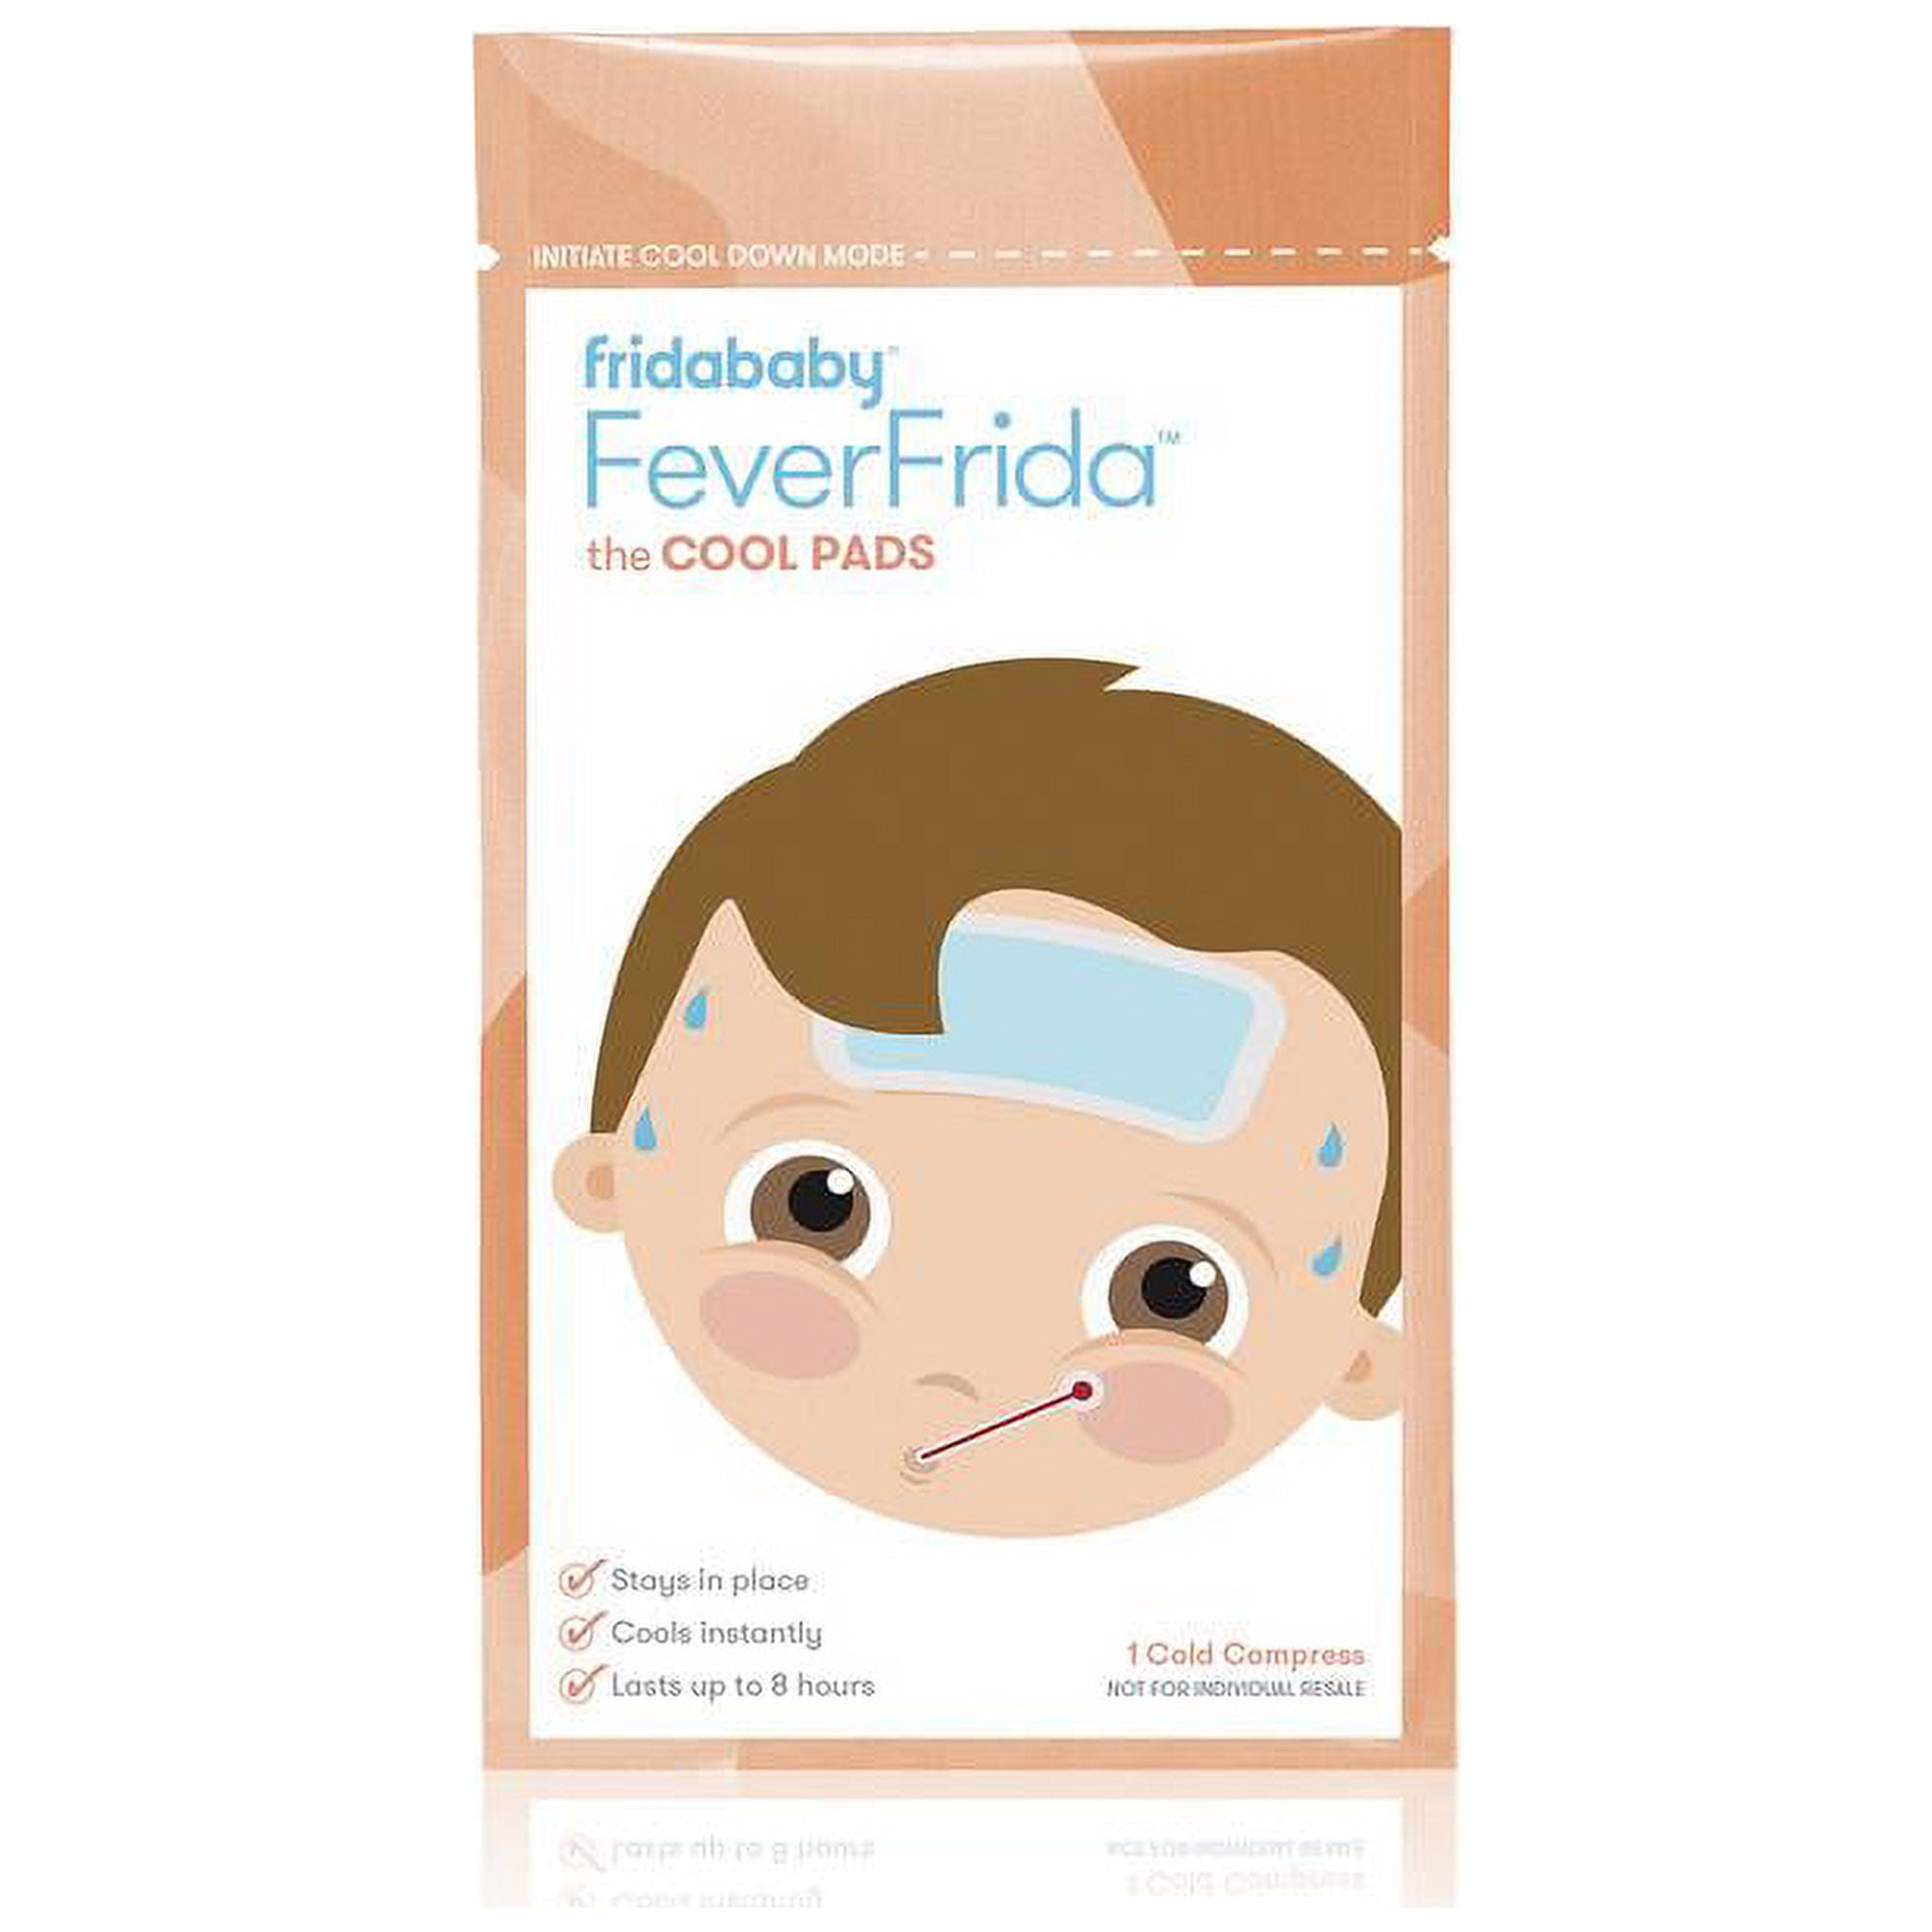 Fridababy FeverFrida Cool Pads - Shop Medical Devices & Supplies at H-E-B